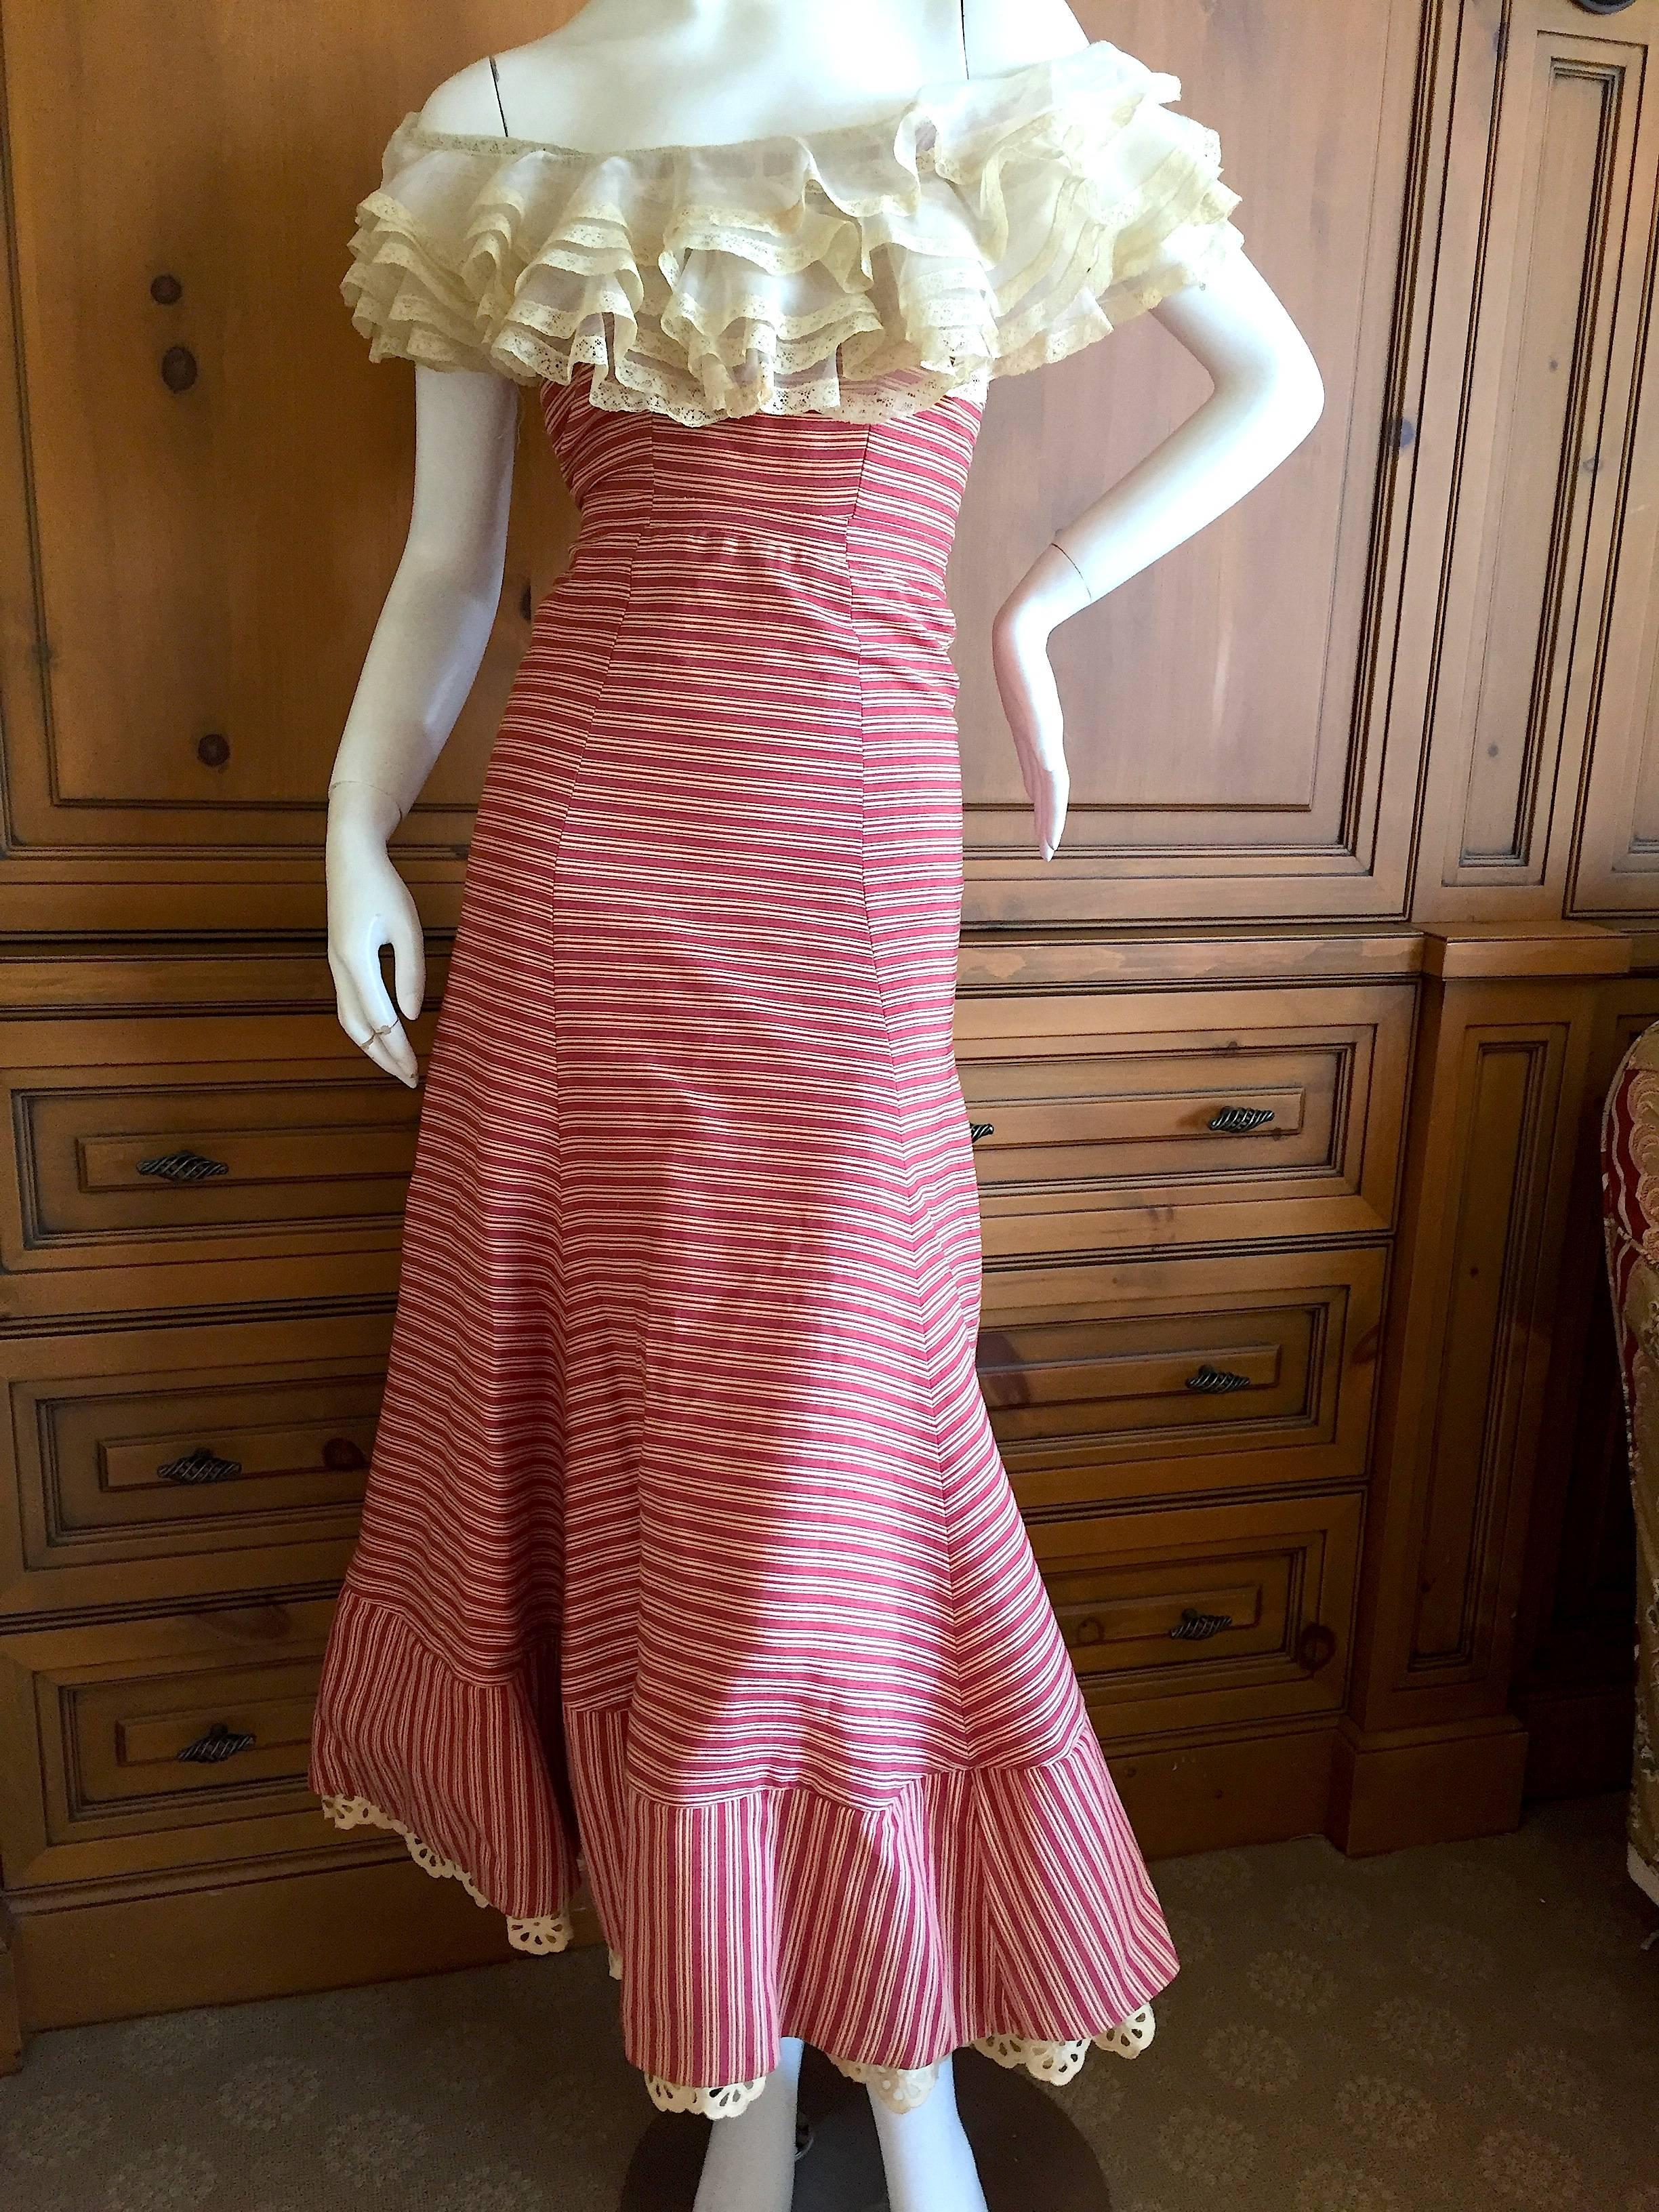 Elegant stripe day dress with lace at the bust and hem.
This beautiful dress belonged to Eleanor de Guine.
This has no label, but details are similar to another dress from this collection which is labeled Saks Fifth Avenue Original.
From the de